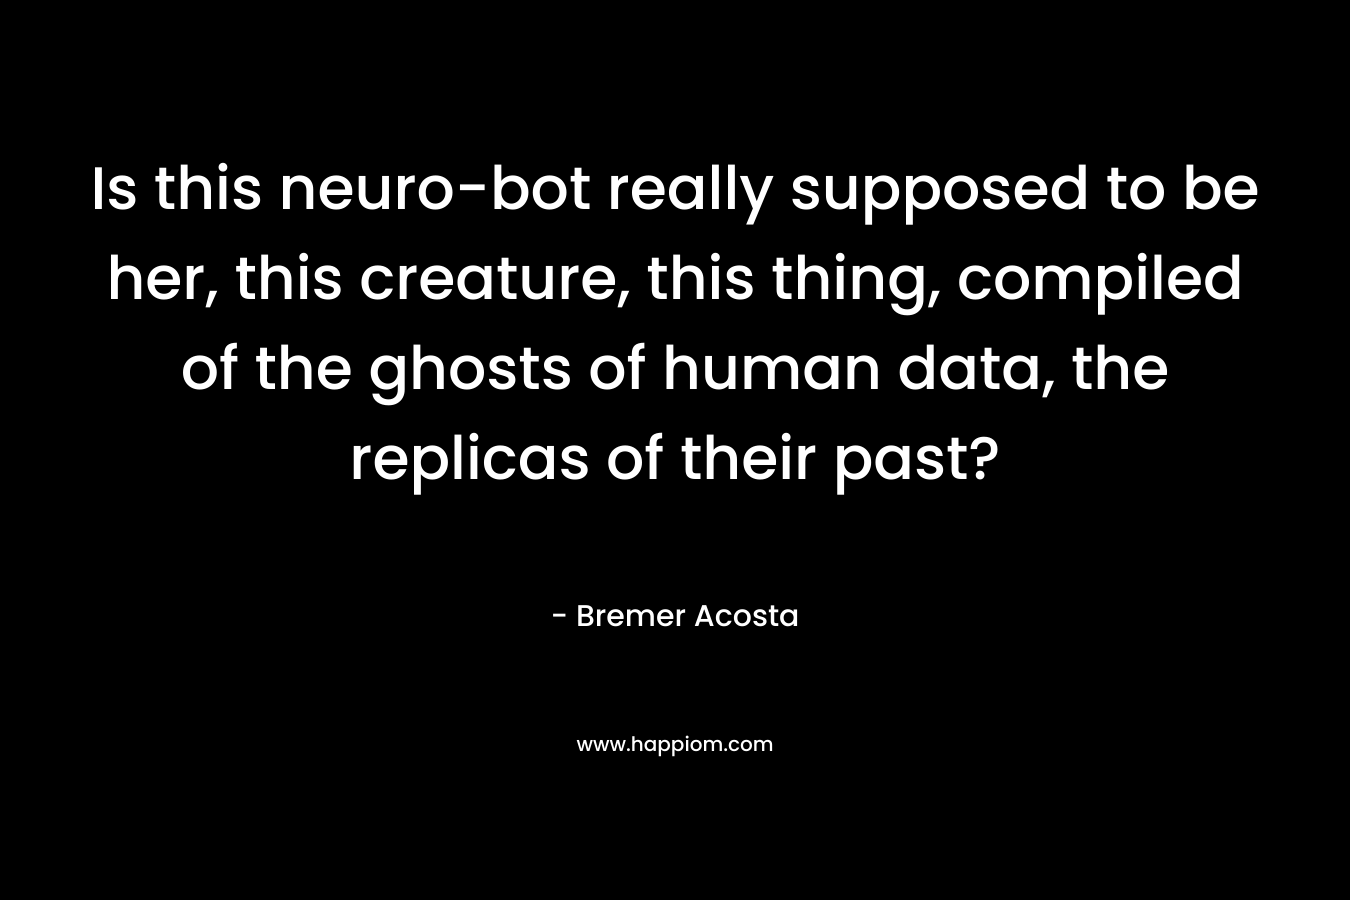 Is this neuro-bot really supposed to be her, this creature, this thing, compiled of the ghosts of human data, the replicas of their past?